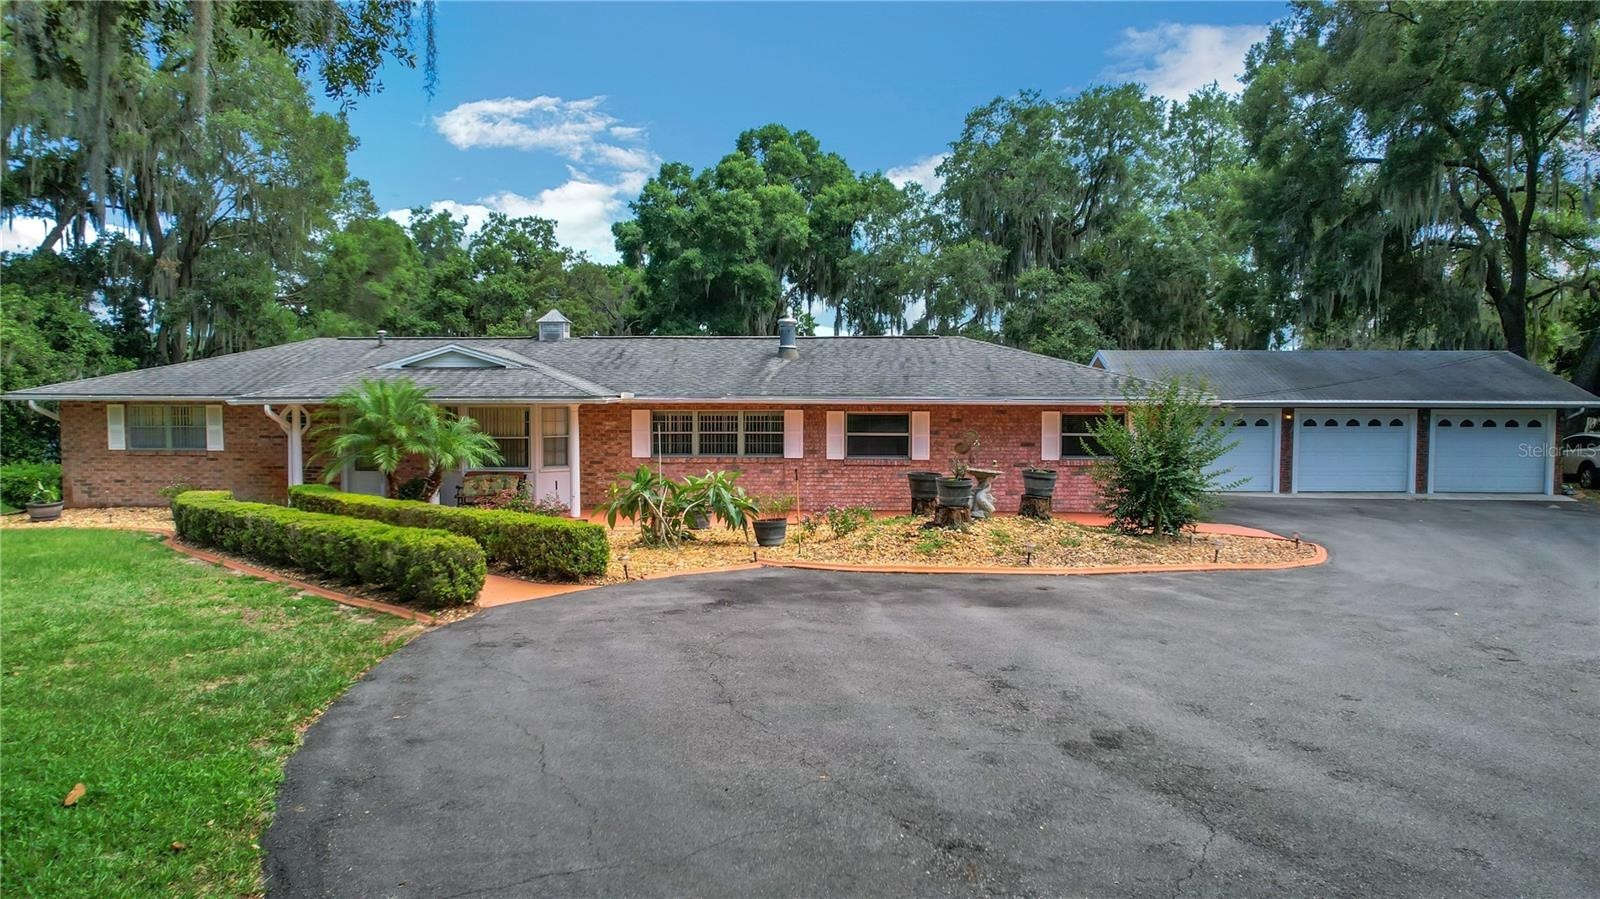 2. 2400 Lake Griffin Road